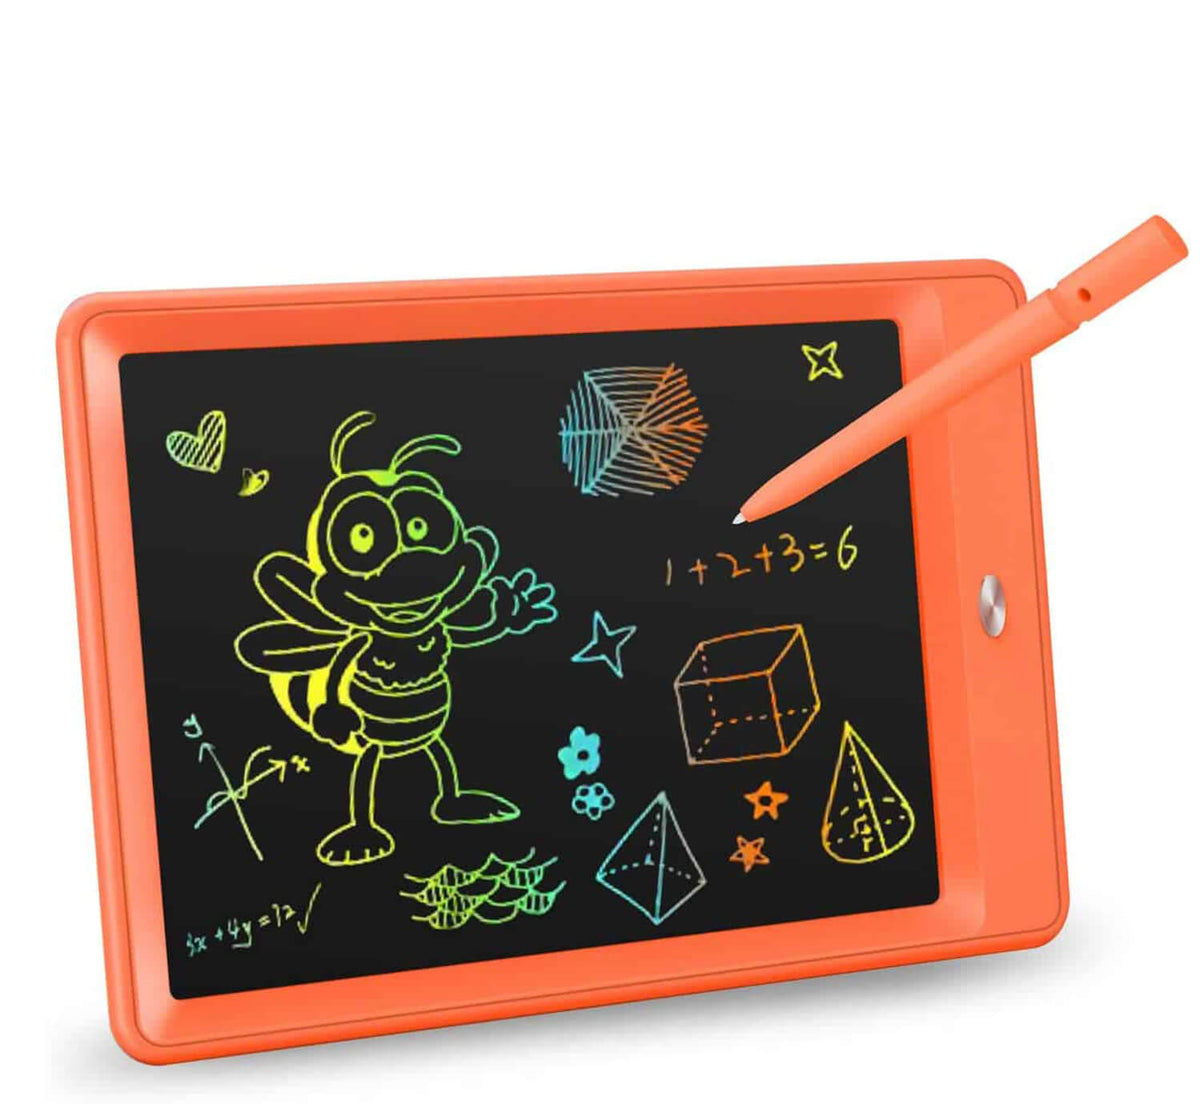 Magnetic Drawing Board Doodle Sketch Pad for 1-3 Year Old Toddler Girls/Boys  Birthday Toy Orange 